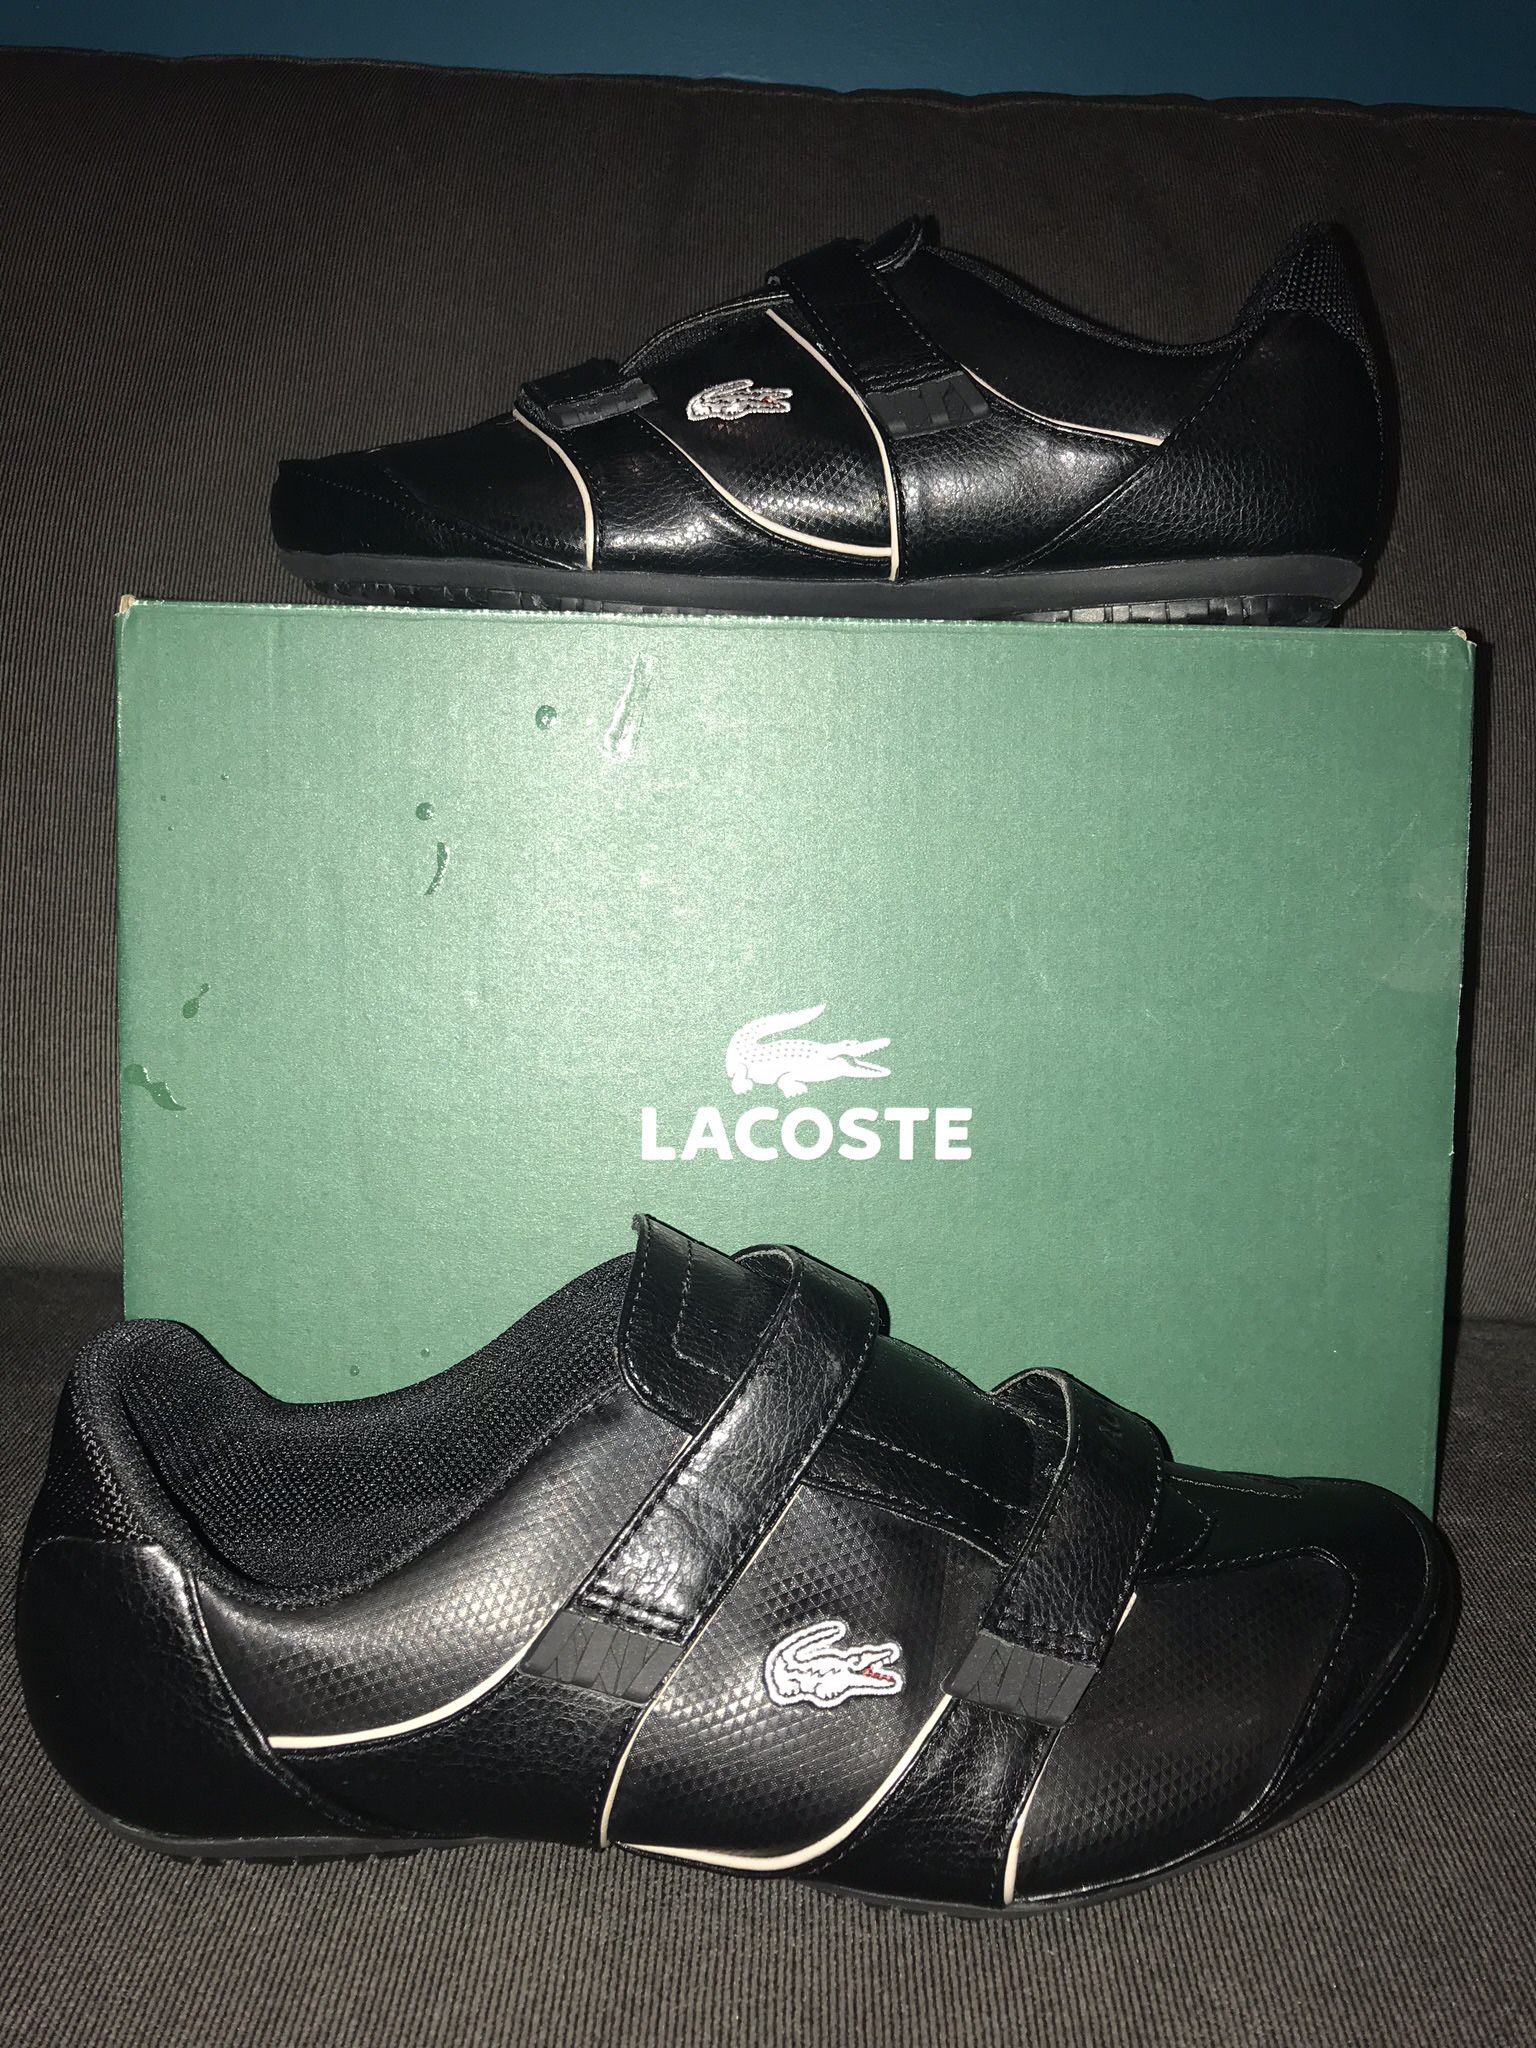 Lacoste Women’s Shoes Size 7 New Never Worn